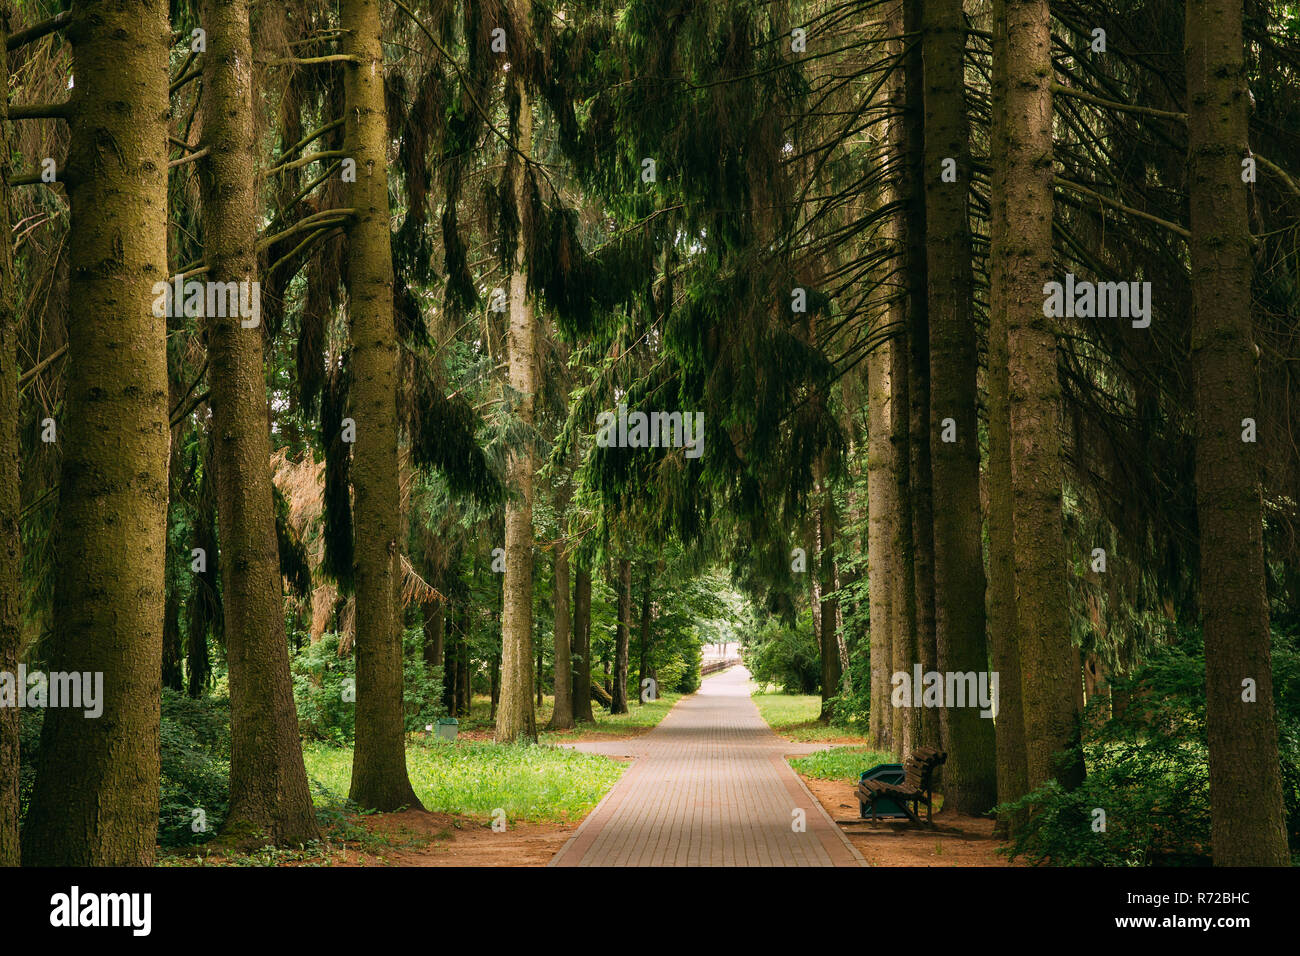 Walkway Lane Path Through Green Picea Abies, Norway Spruce Coniferous Trees In Forest. Beautiful Alley, Road In Park. Pathway, Natural Tunnel, Way Thr Stock Photo